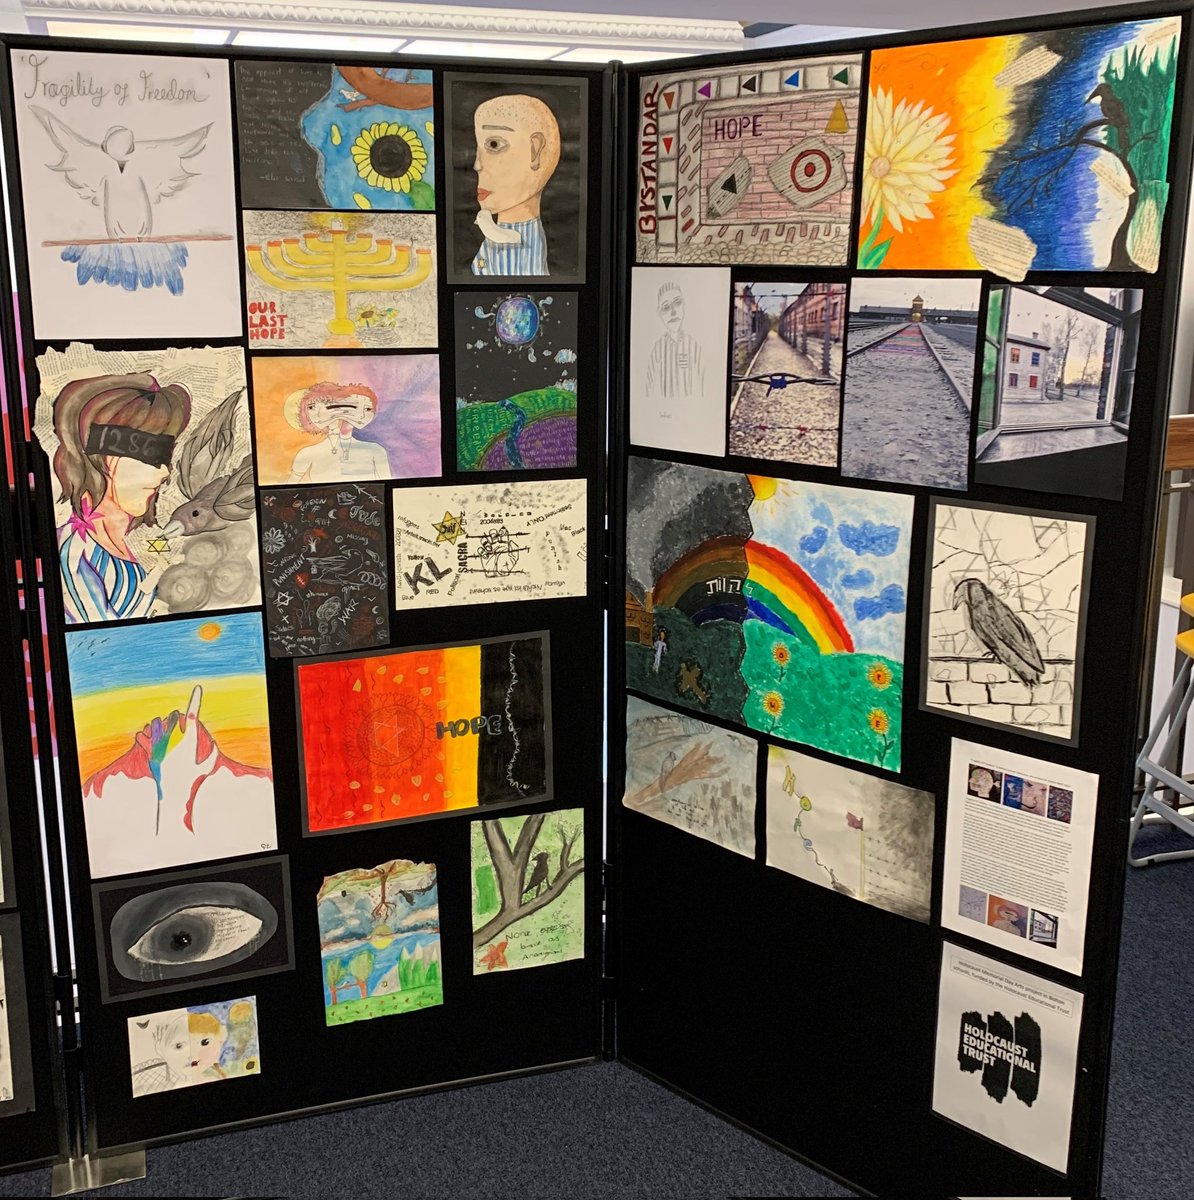 'Fragility of Freedom,' our Bolton schools Holocaust Memorial Day Arts Project is now on display @BoltonLMS. Open to all to go & see the wonderful art from students @HarperGreen @LadybridgeHigh @KearsleyAcademy @SJCES @TheUCSchool & a local EHE group. Running until 11.02.24.